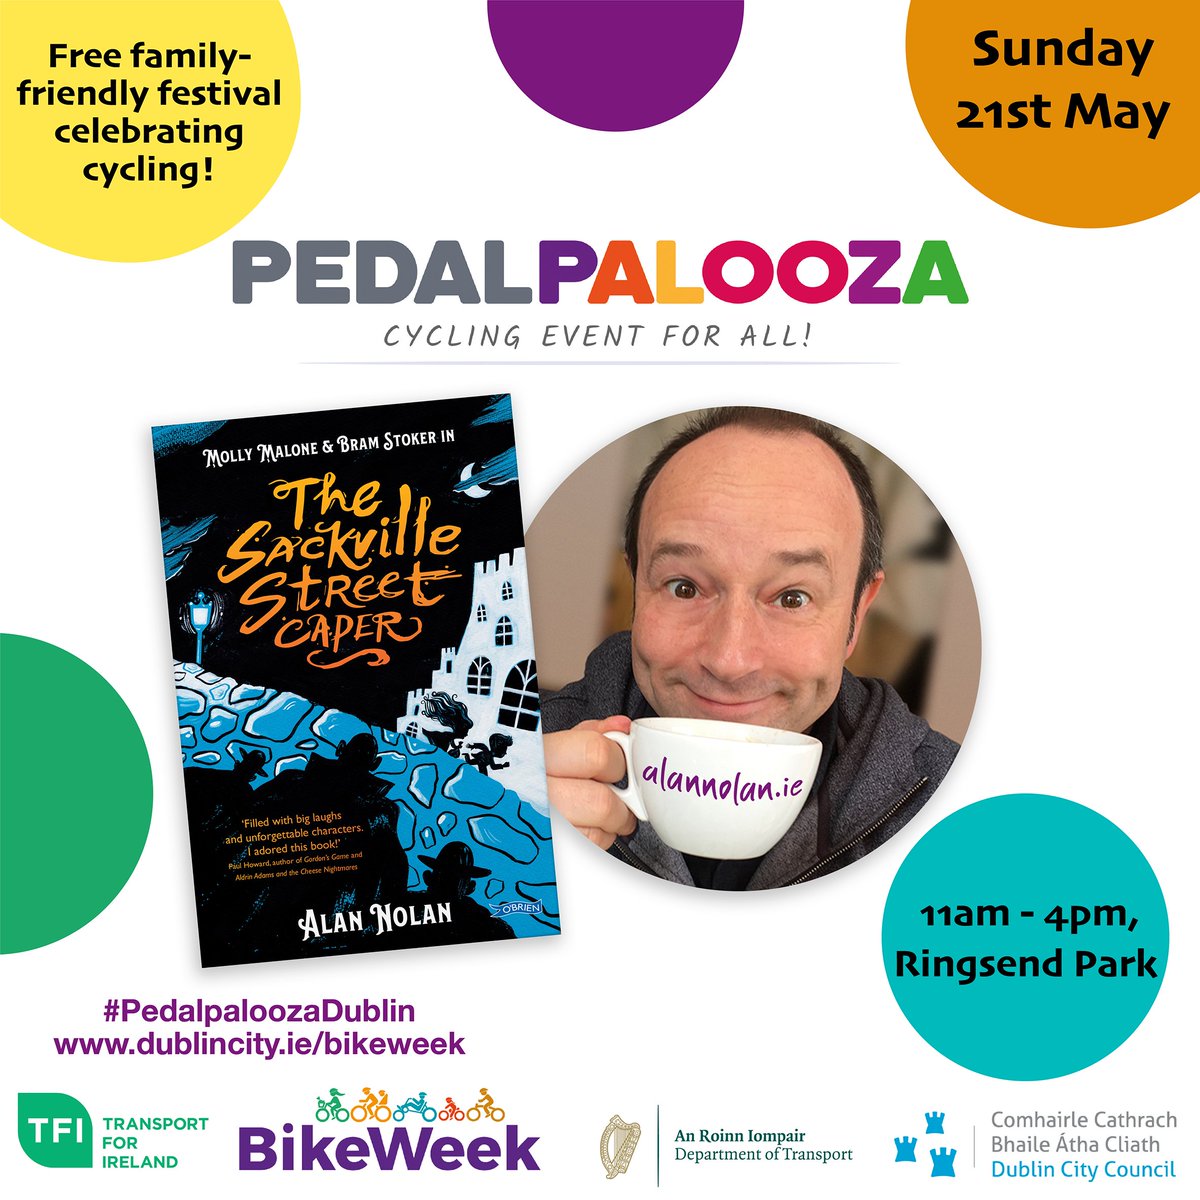 VAMPIRES ON BIKES!! Very happy to be storytelling and drawing with kids at Pedalpalooza in Ringsend Park this Sunday – see yiz there! 
#PedalpaloozaDublin #bikeweek 
@DubCityCouncil @OBrienPress